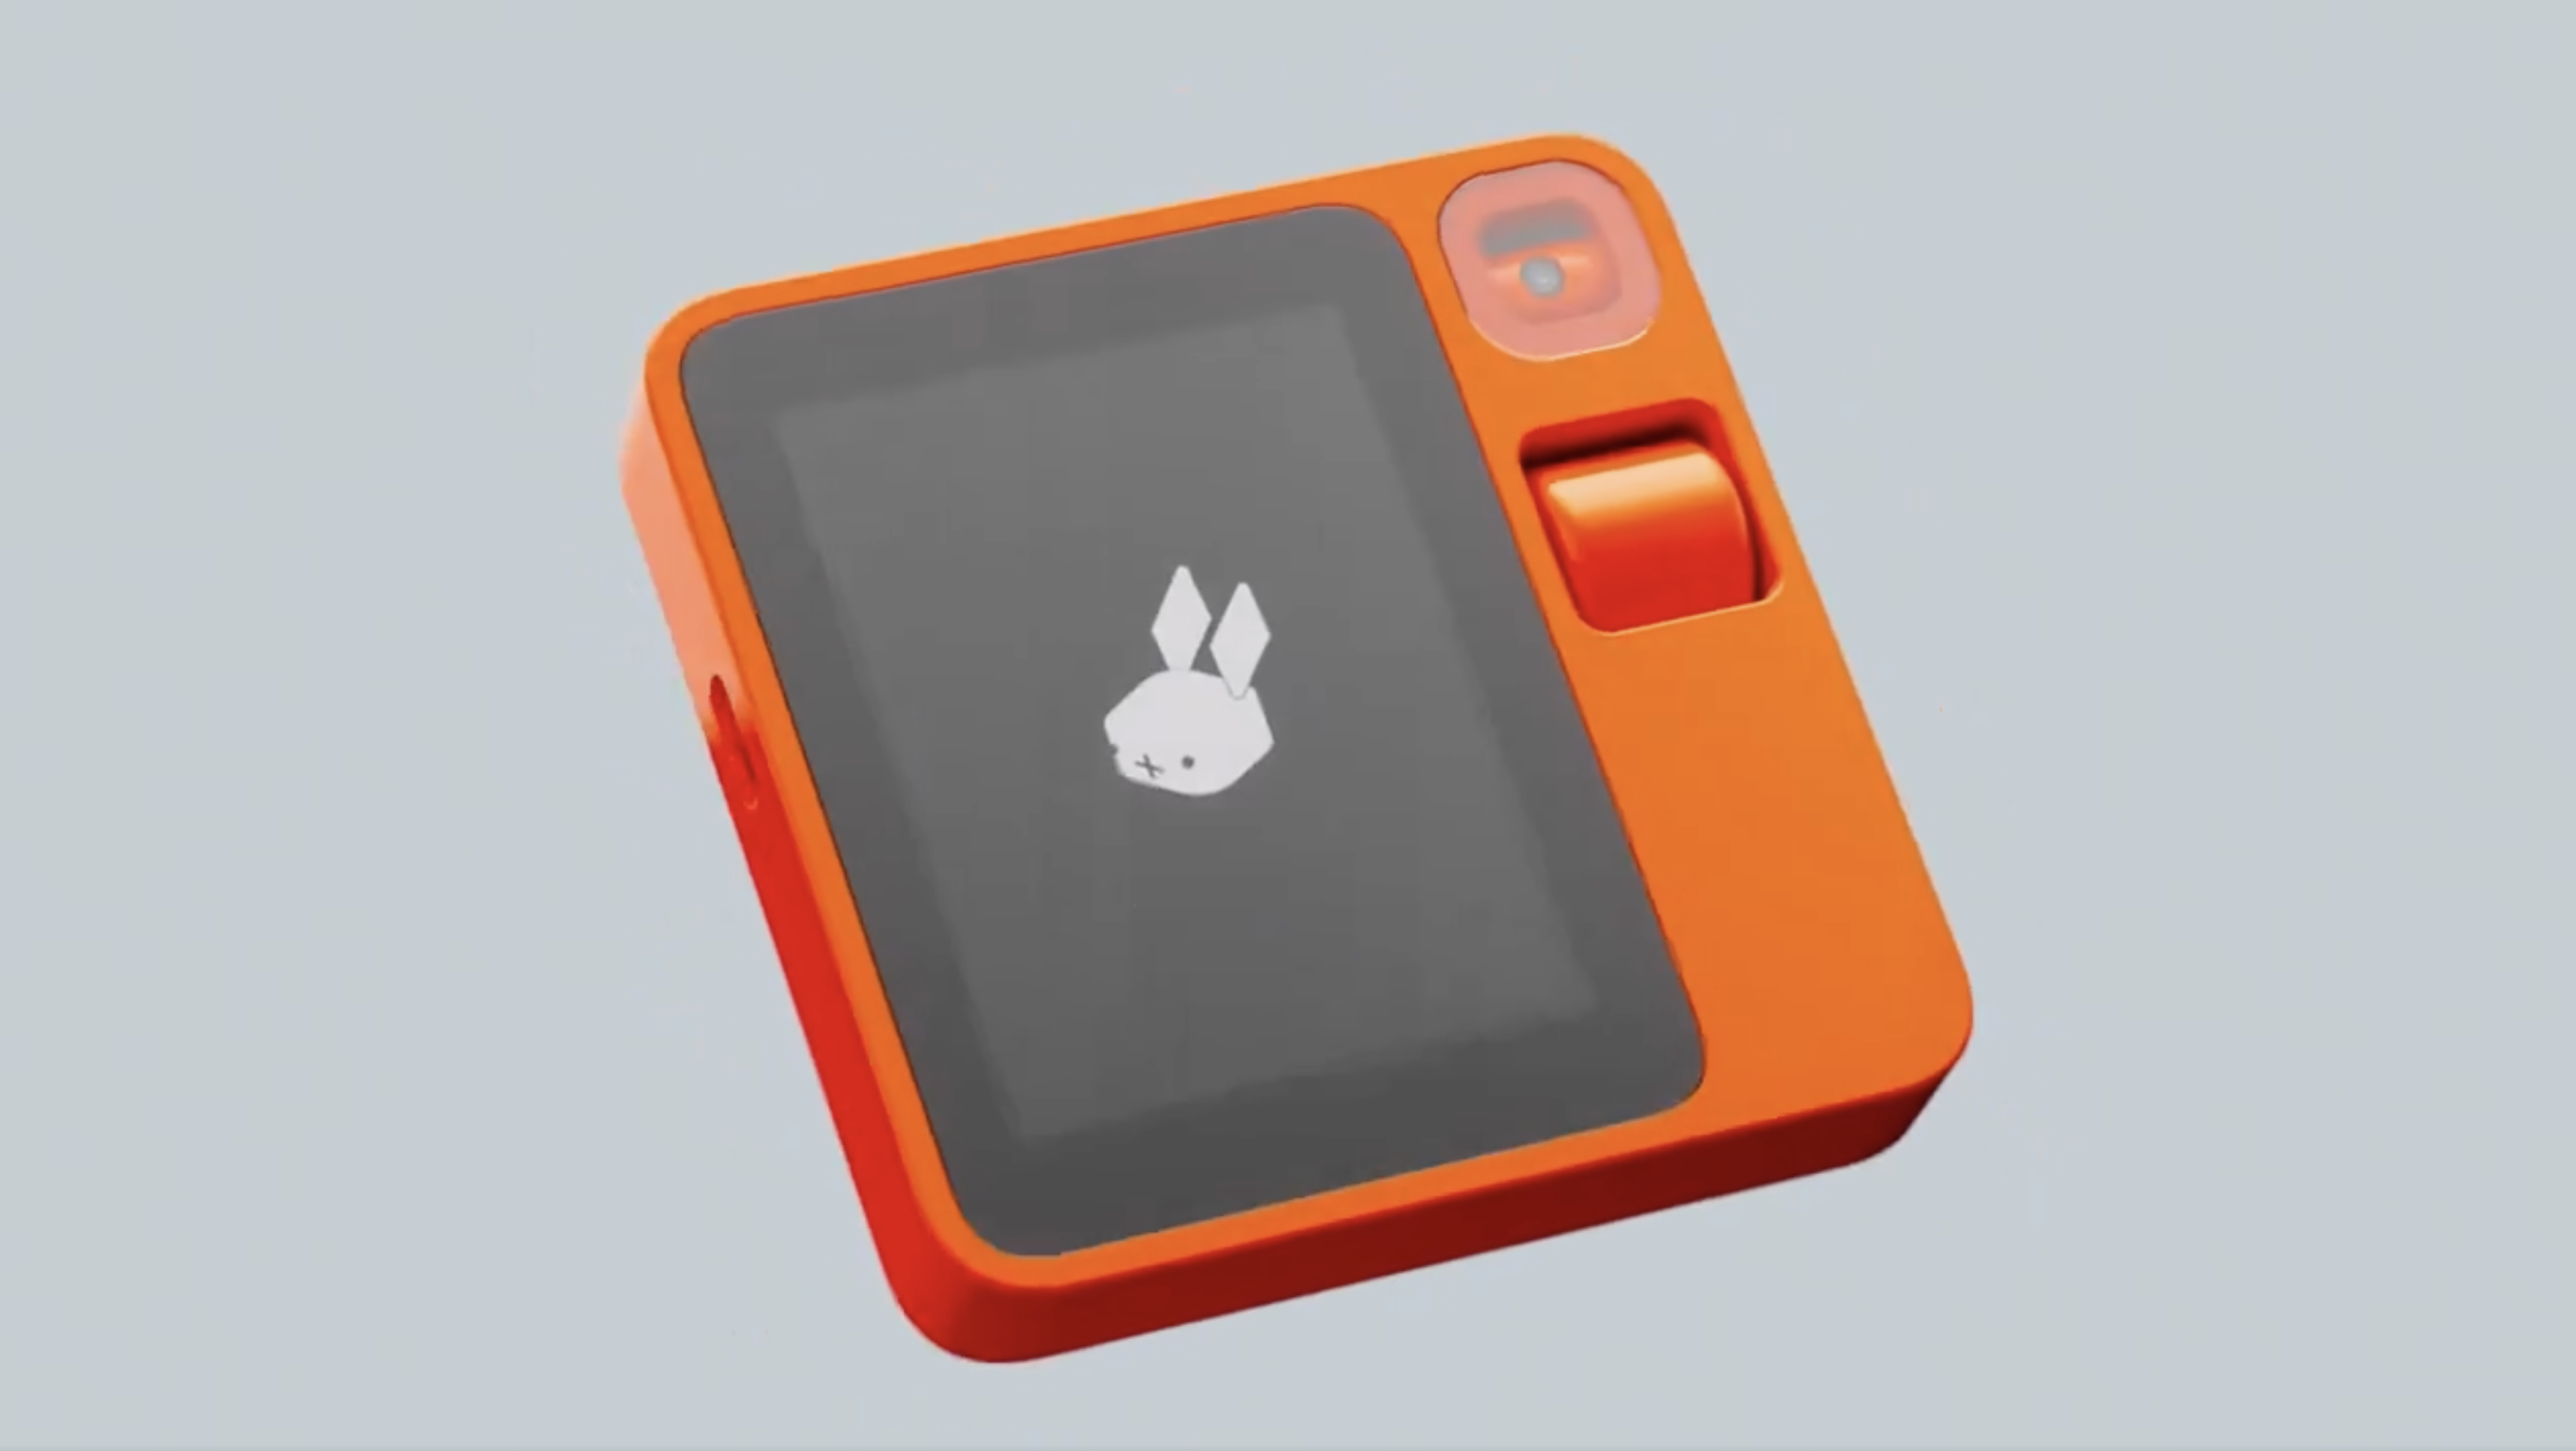 Rabbit r1, an unusual pocket-sized digital assistant, sells out in one day  - SamMobile